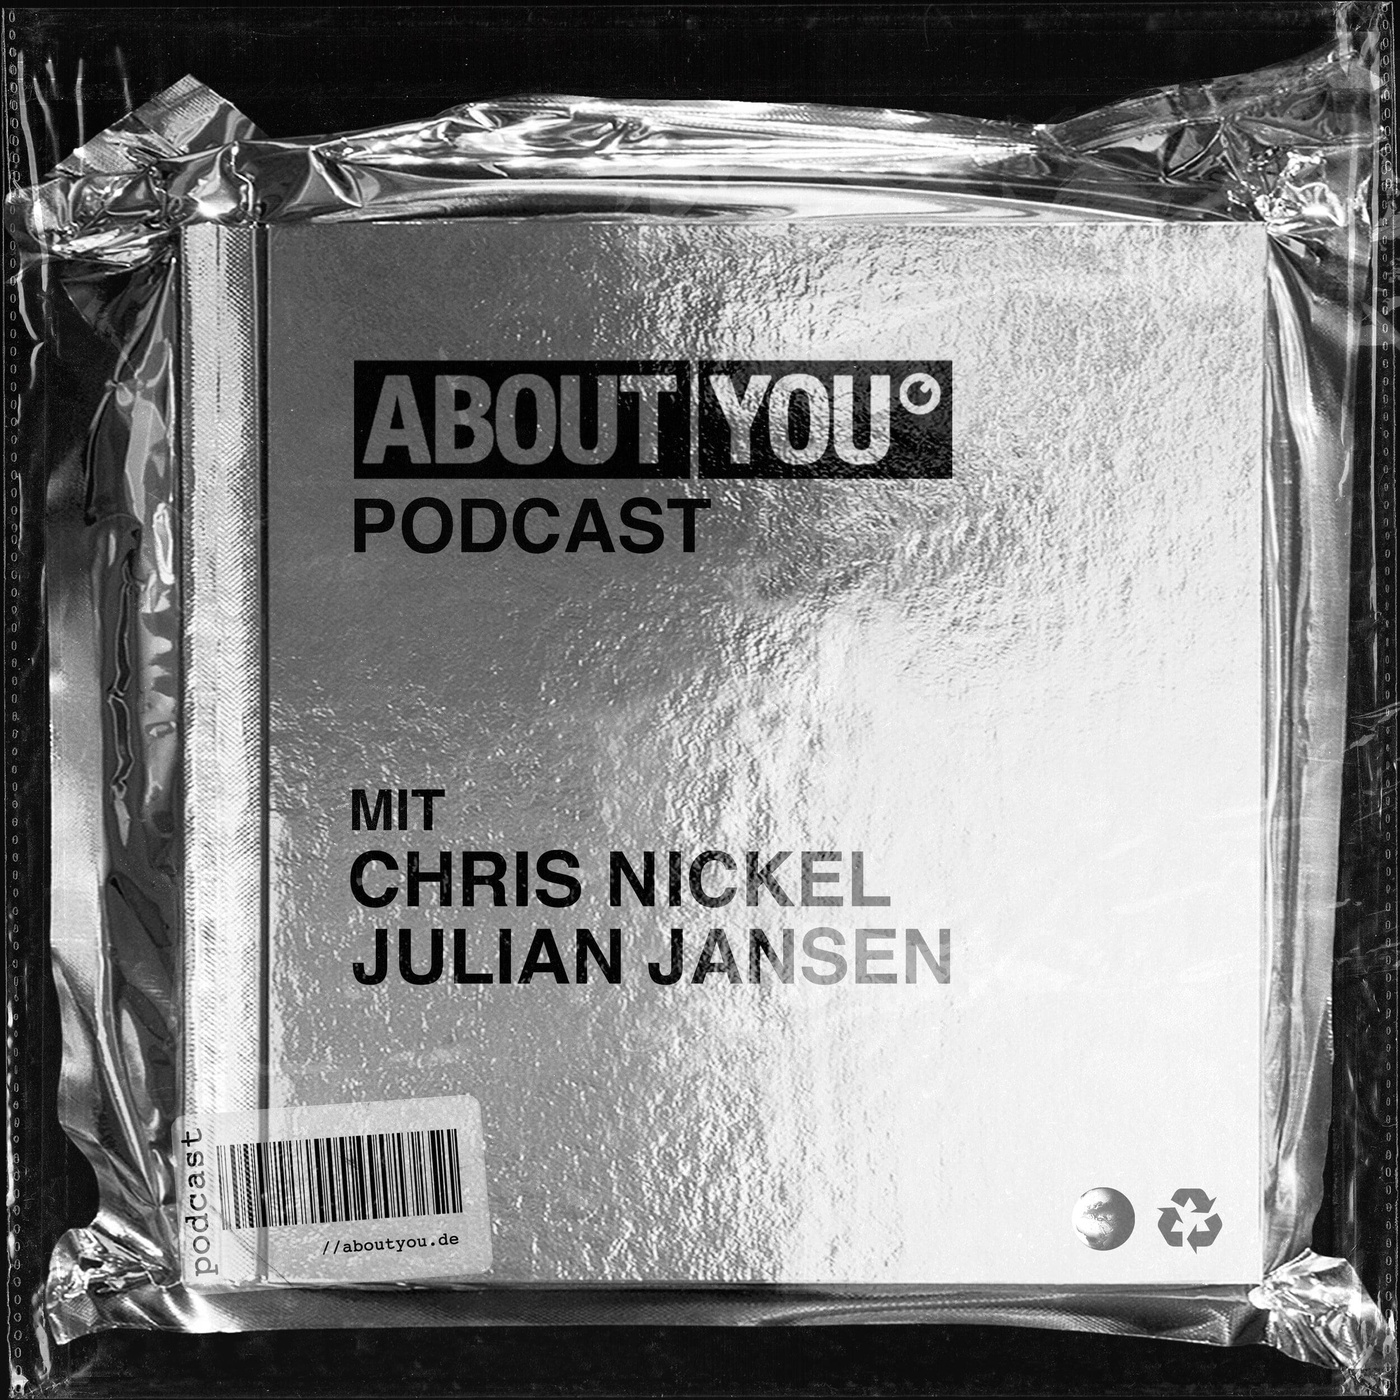 ABOUT YOU Podcast - New Content Marketing